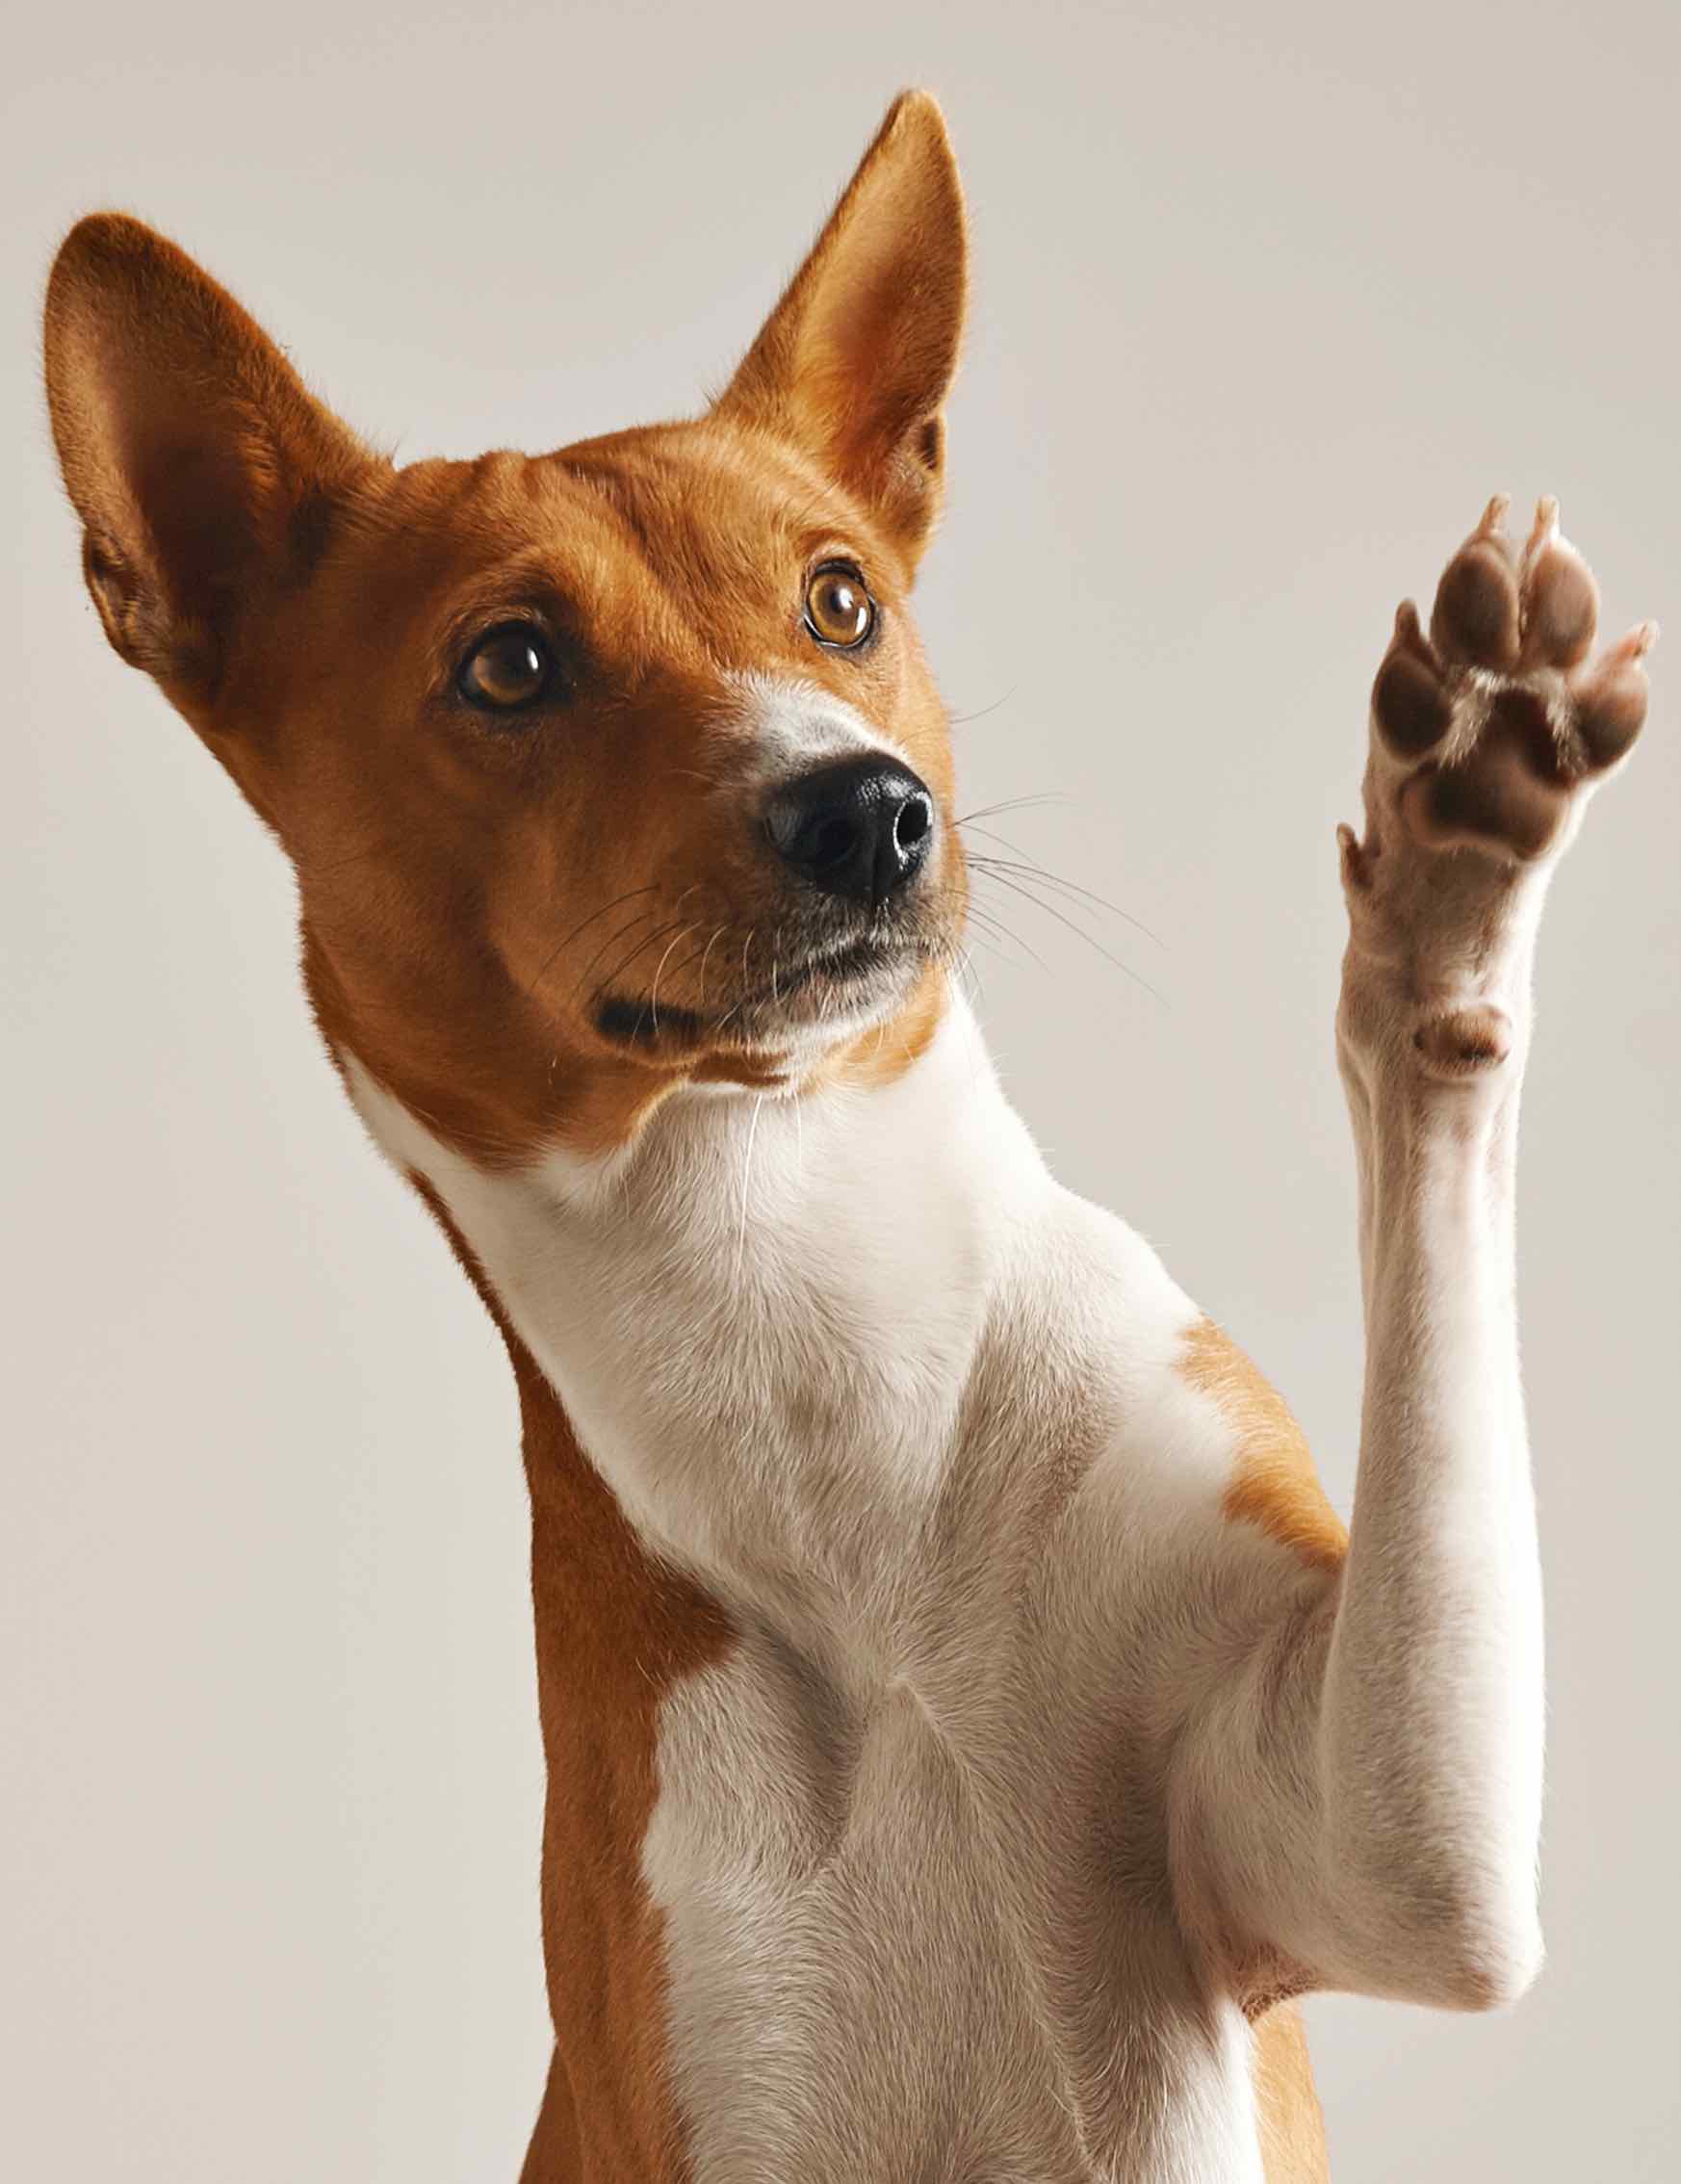 Dog raising his paw to ask a question during Dog Training Elite training class in Baton Rouge.